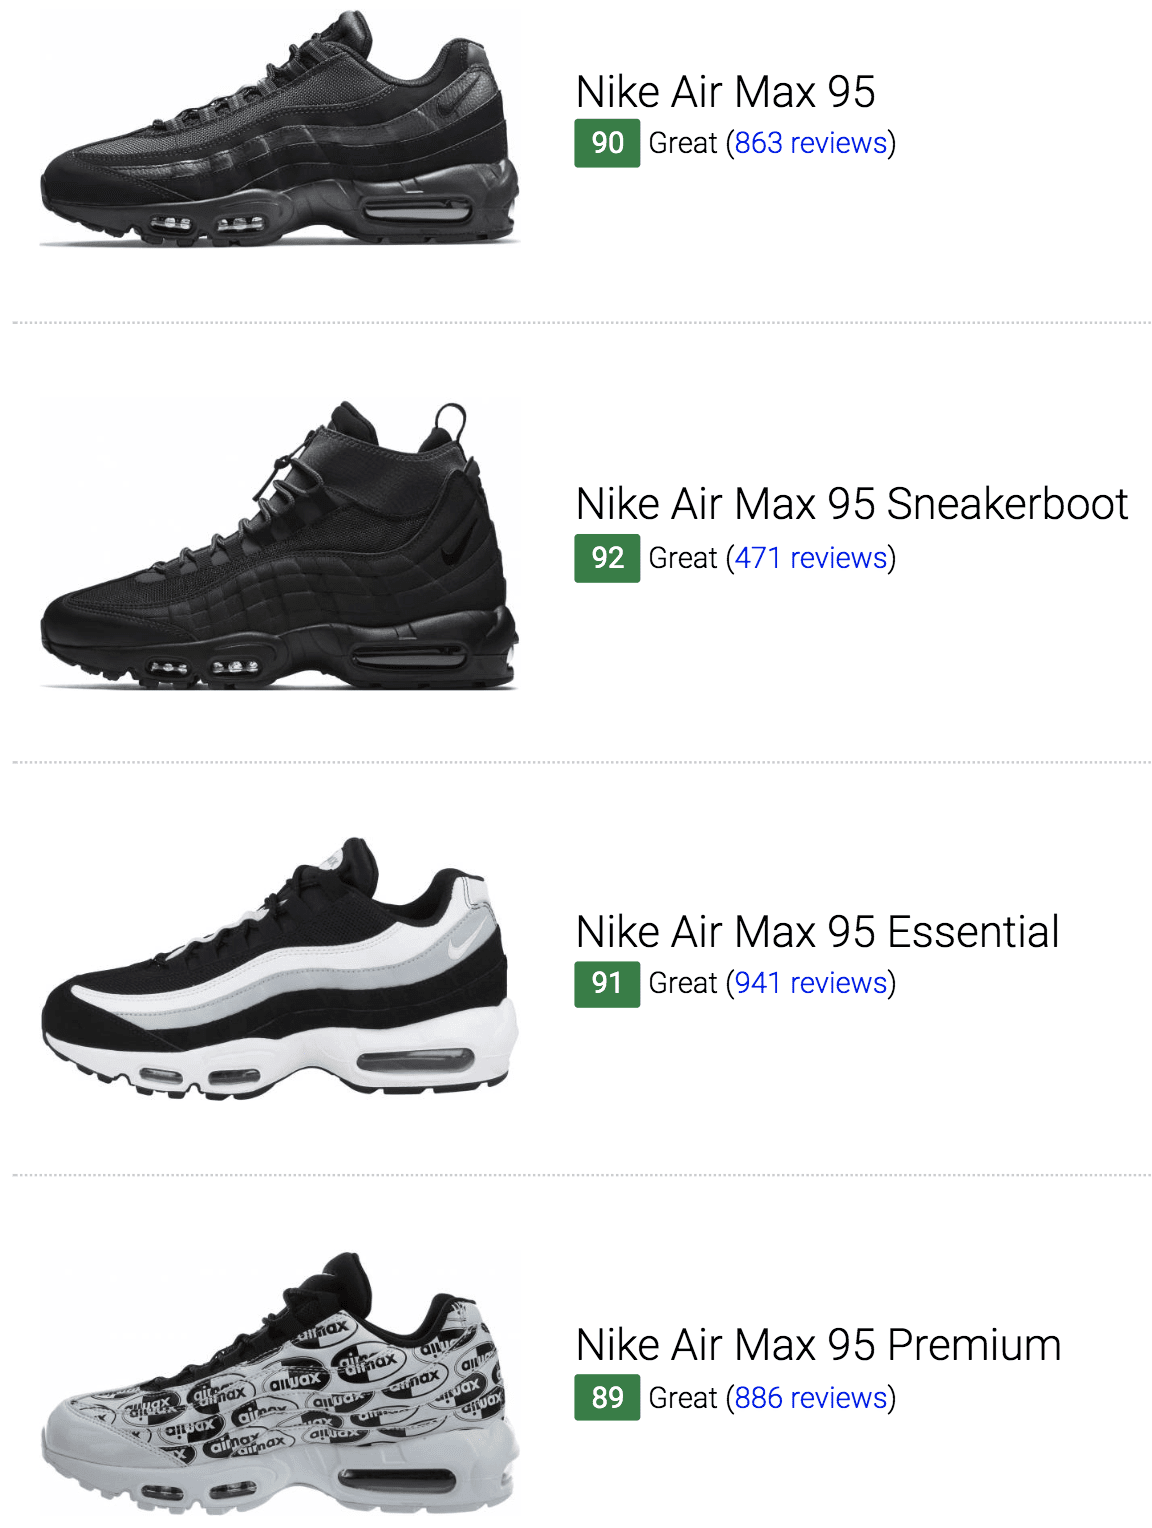 Save 20% on Nike Air Max 95 Sneakers 